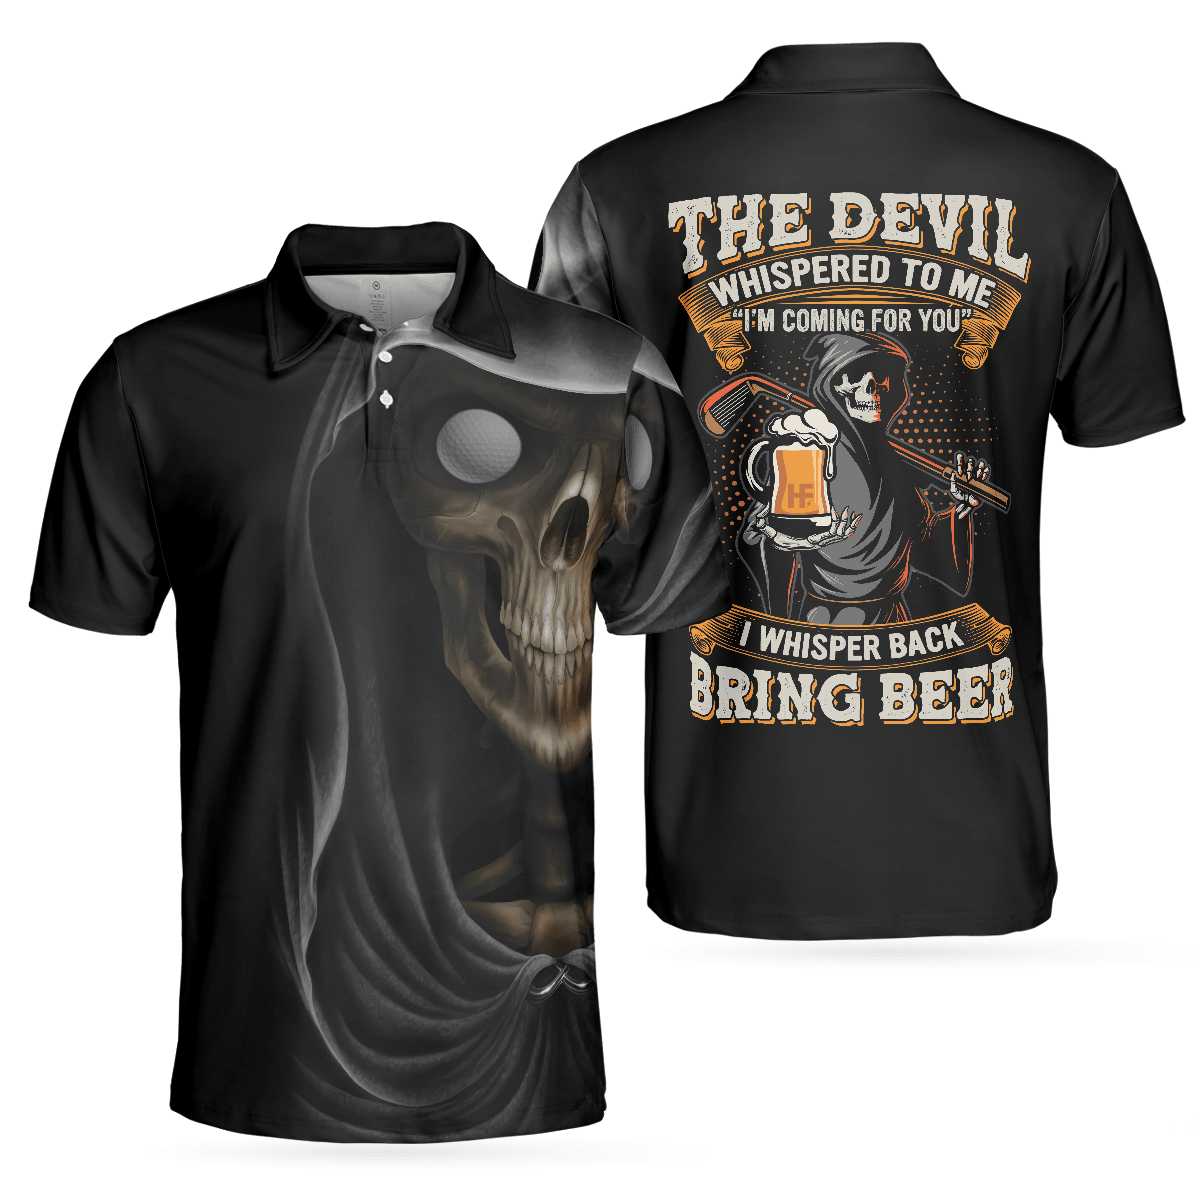 Men Golf Polo Shirt - Golf Bring Beer Polo Shirt, The Devil Whispered To Me I'm Coming For You Polo Shirt - Perfect Gift For Men, Golfers - Amzanimalsgift